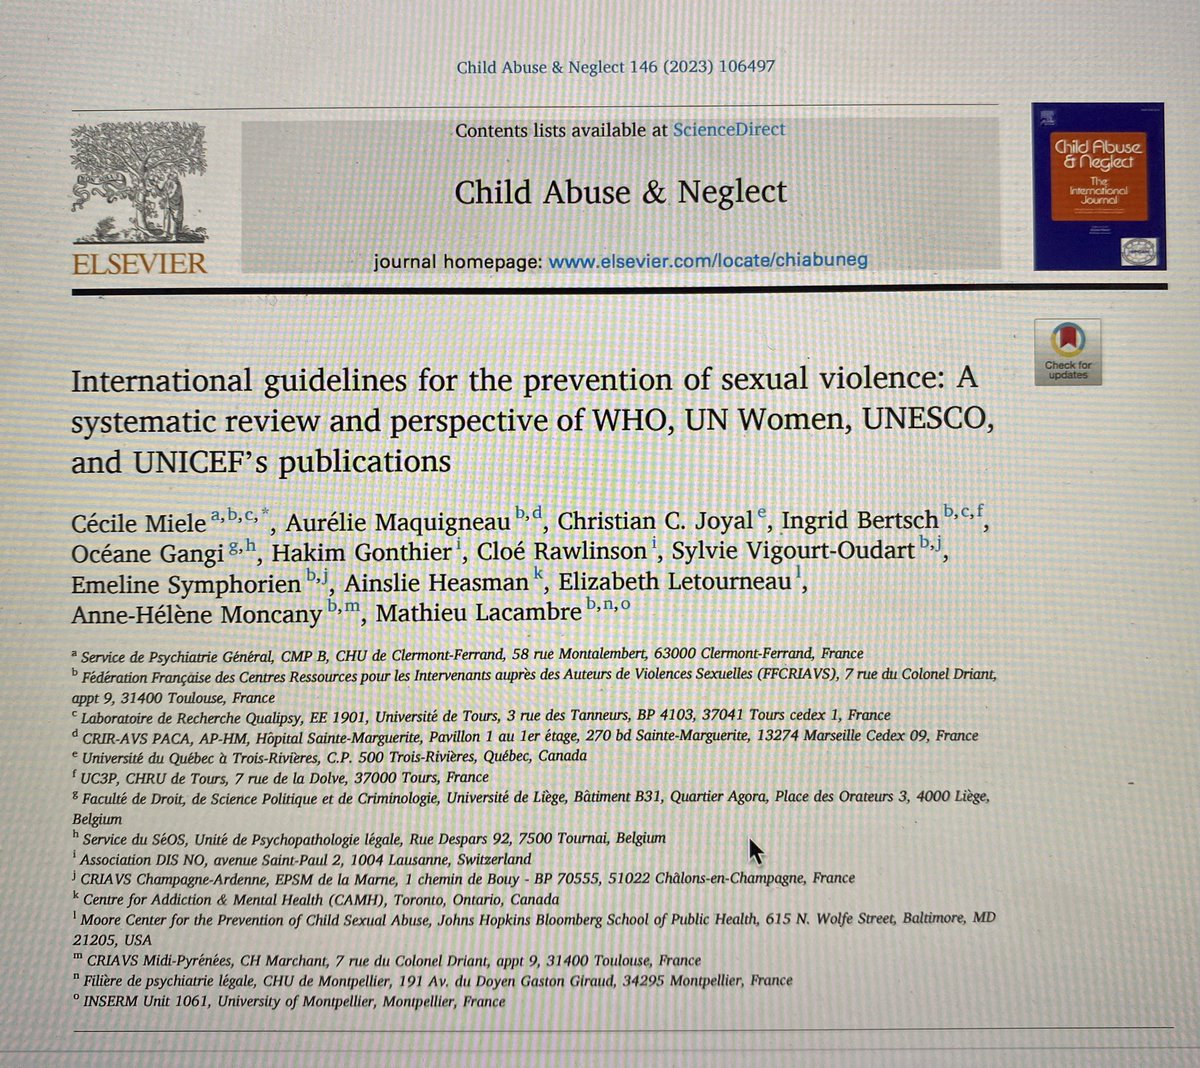 We are pleased and proud to share this original work. A basis for international collaboration to stop #Child #Sexual #violence @MakeSocietySafe @MooreCenter_JHU @StopItNowUK @FF_CRIAVS @UNICEF @UNESCO_fr @ONU_fr @ONUFemmes @BeBraveGlobal @Facealinceste @UN_EndViolence @AIUS_fr